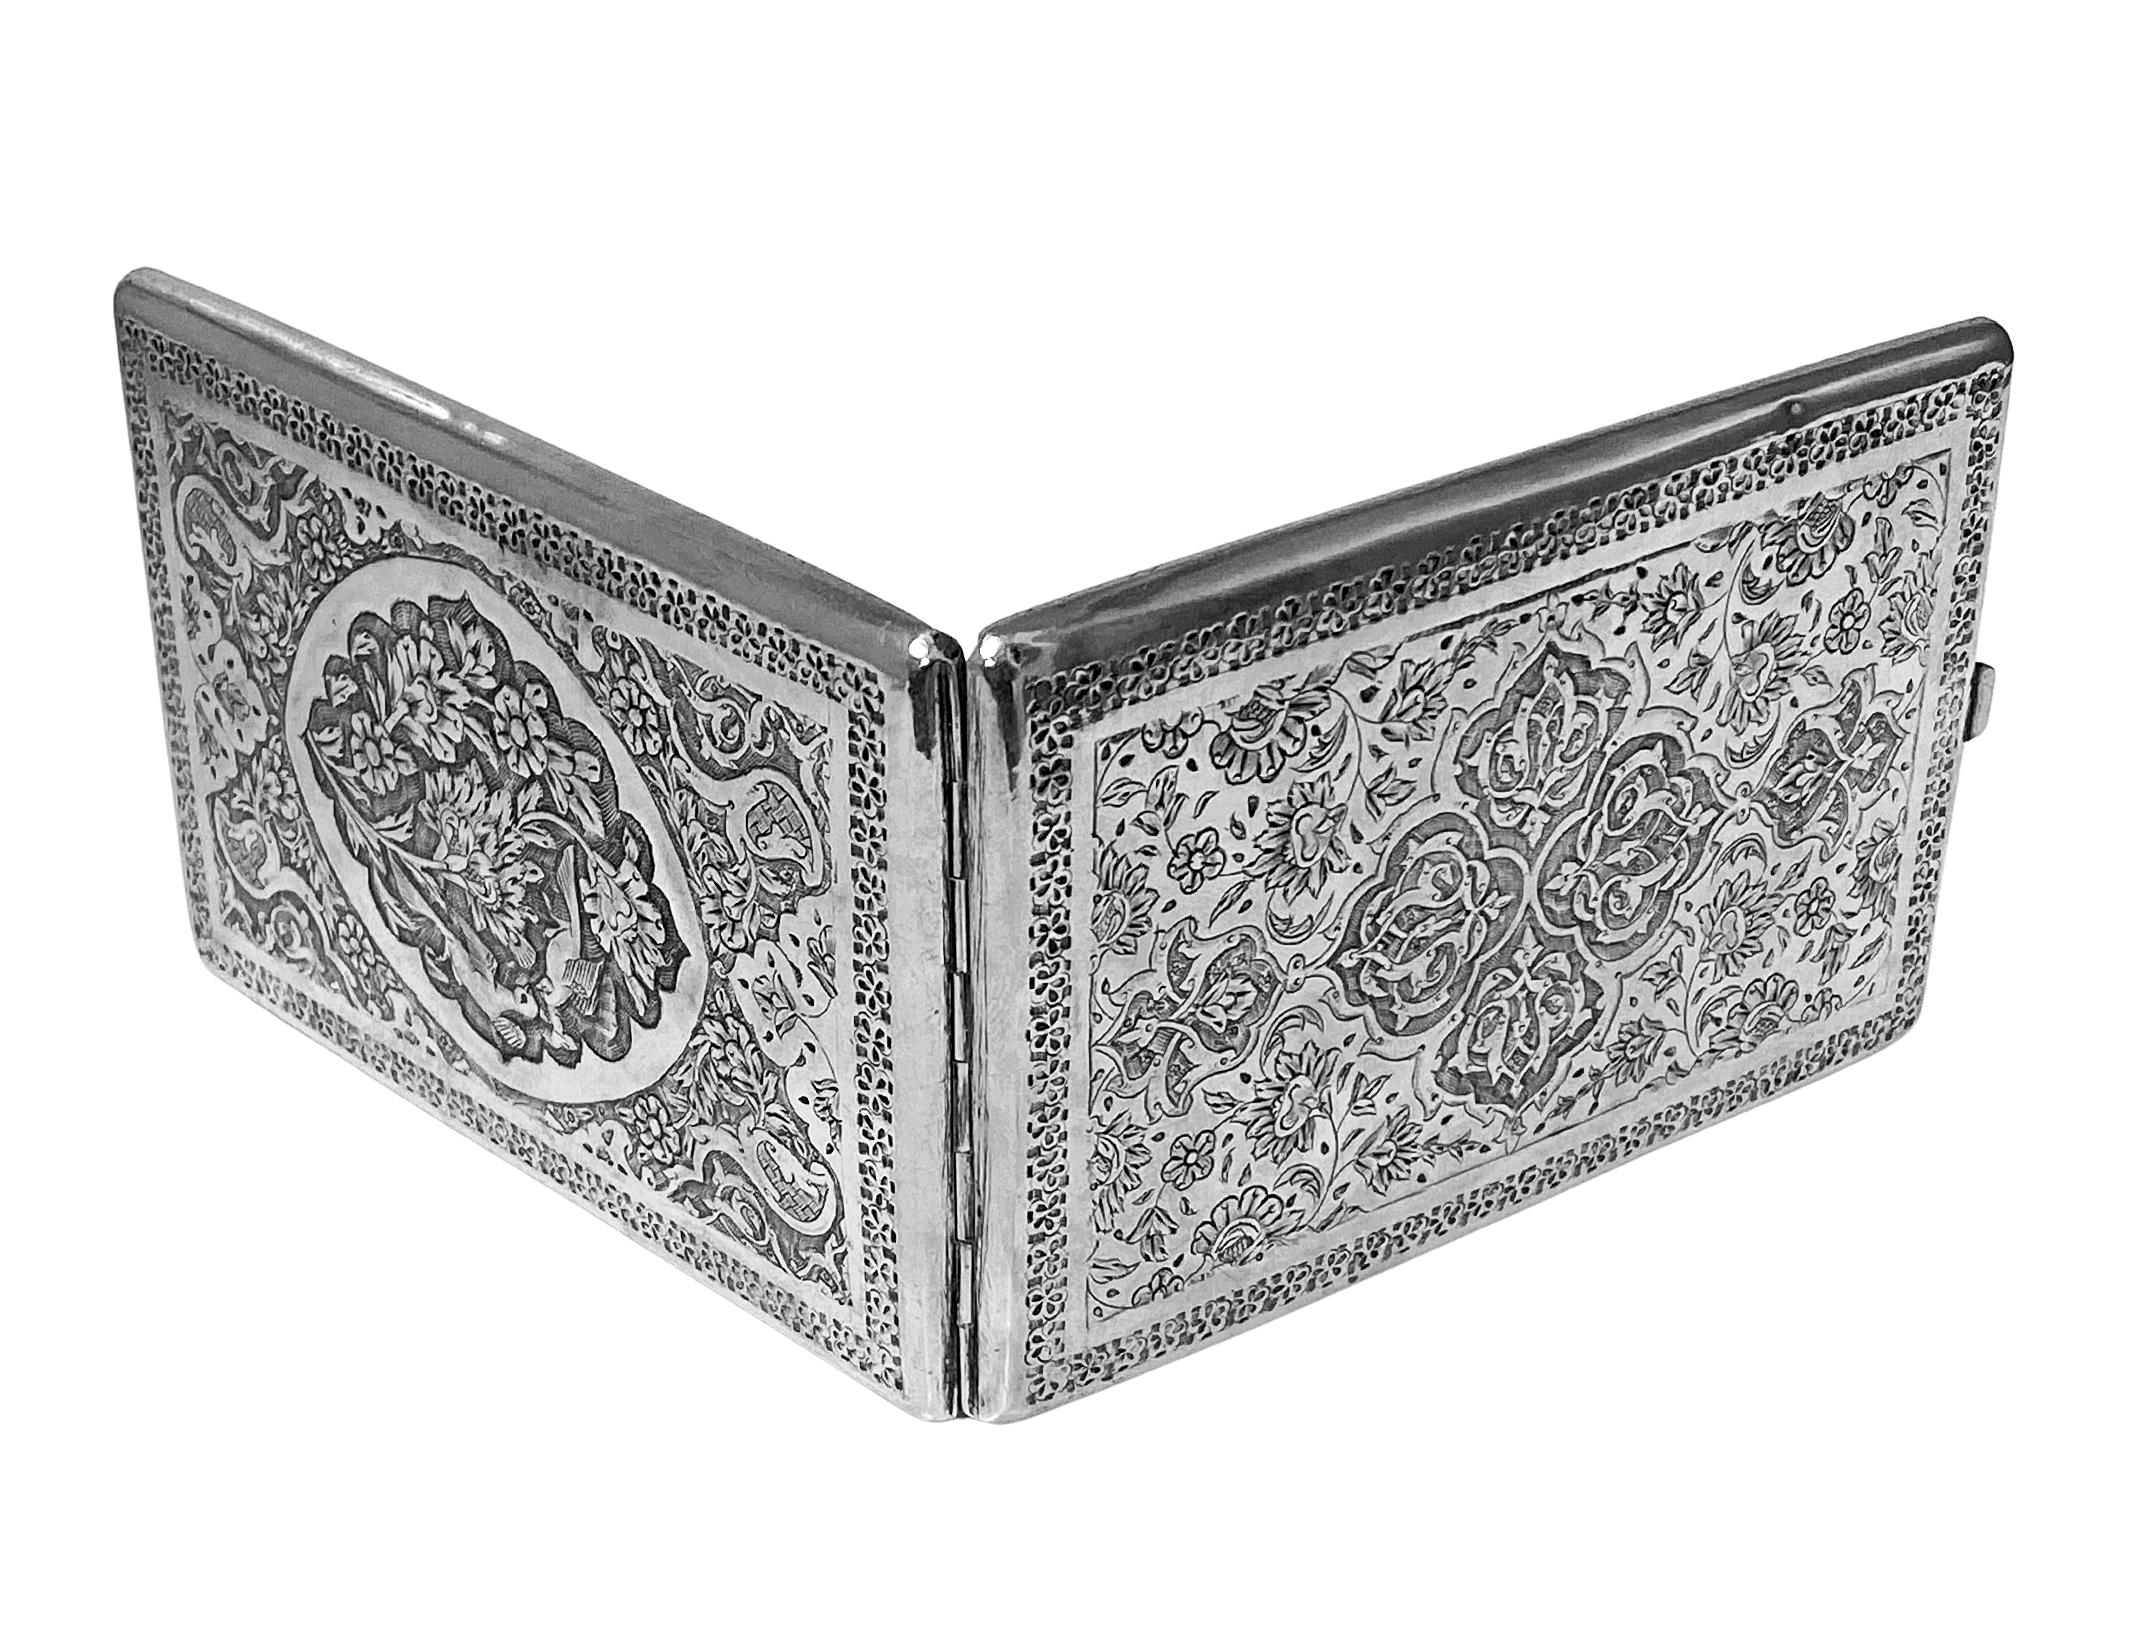 Antique Persian solid silver cigarette case C.1900 maker’s mark possibly Aghazadian. The front and reverse of case with beautiful chased and engraved birds and flowers design. Interior marks possibly for Aghazadian. Measures: 4.50 x 3.00 inches.